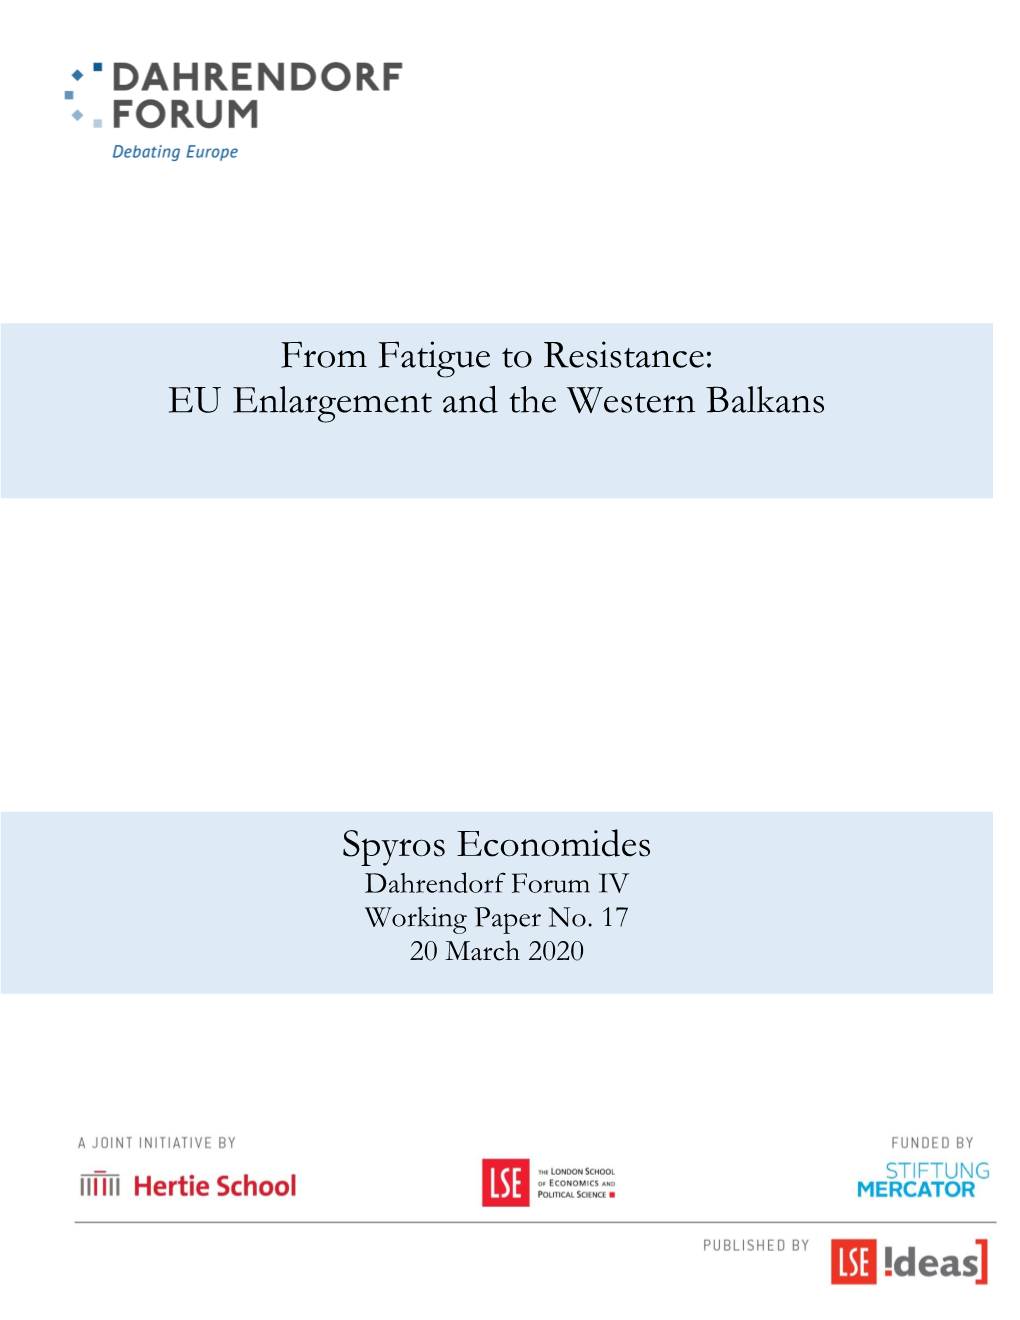 Spyros Economides from Fatigue to Resistance: EU Enlargement And